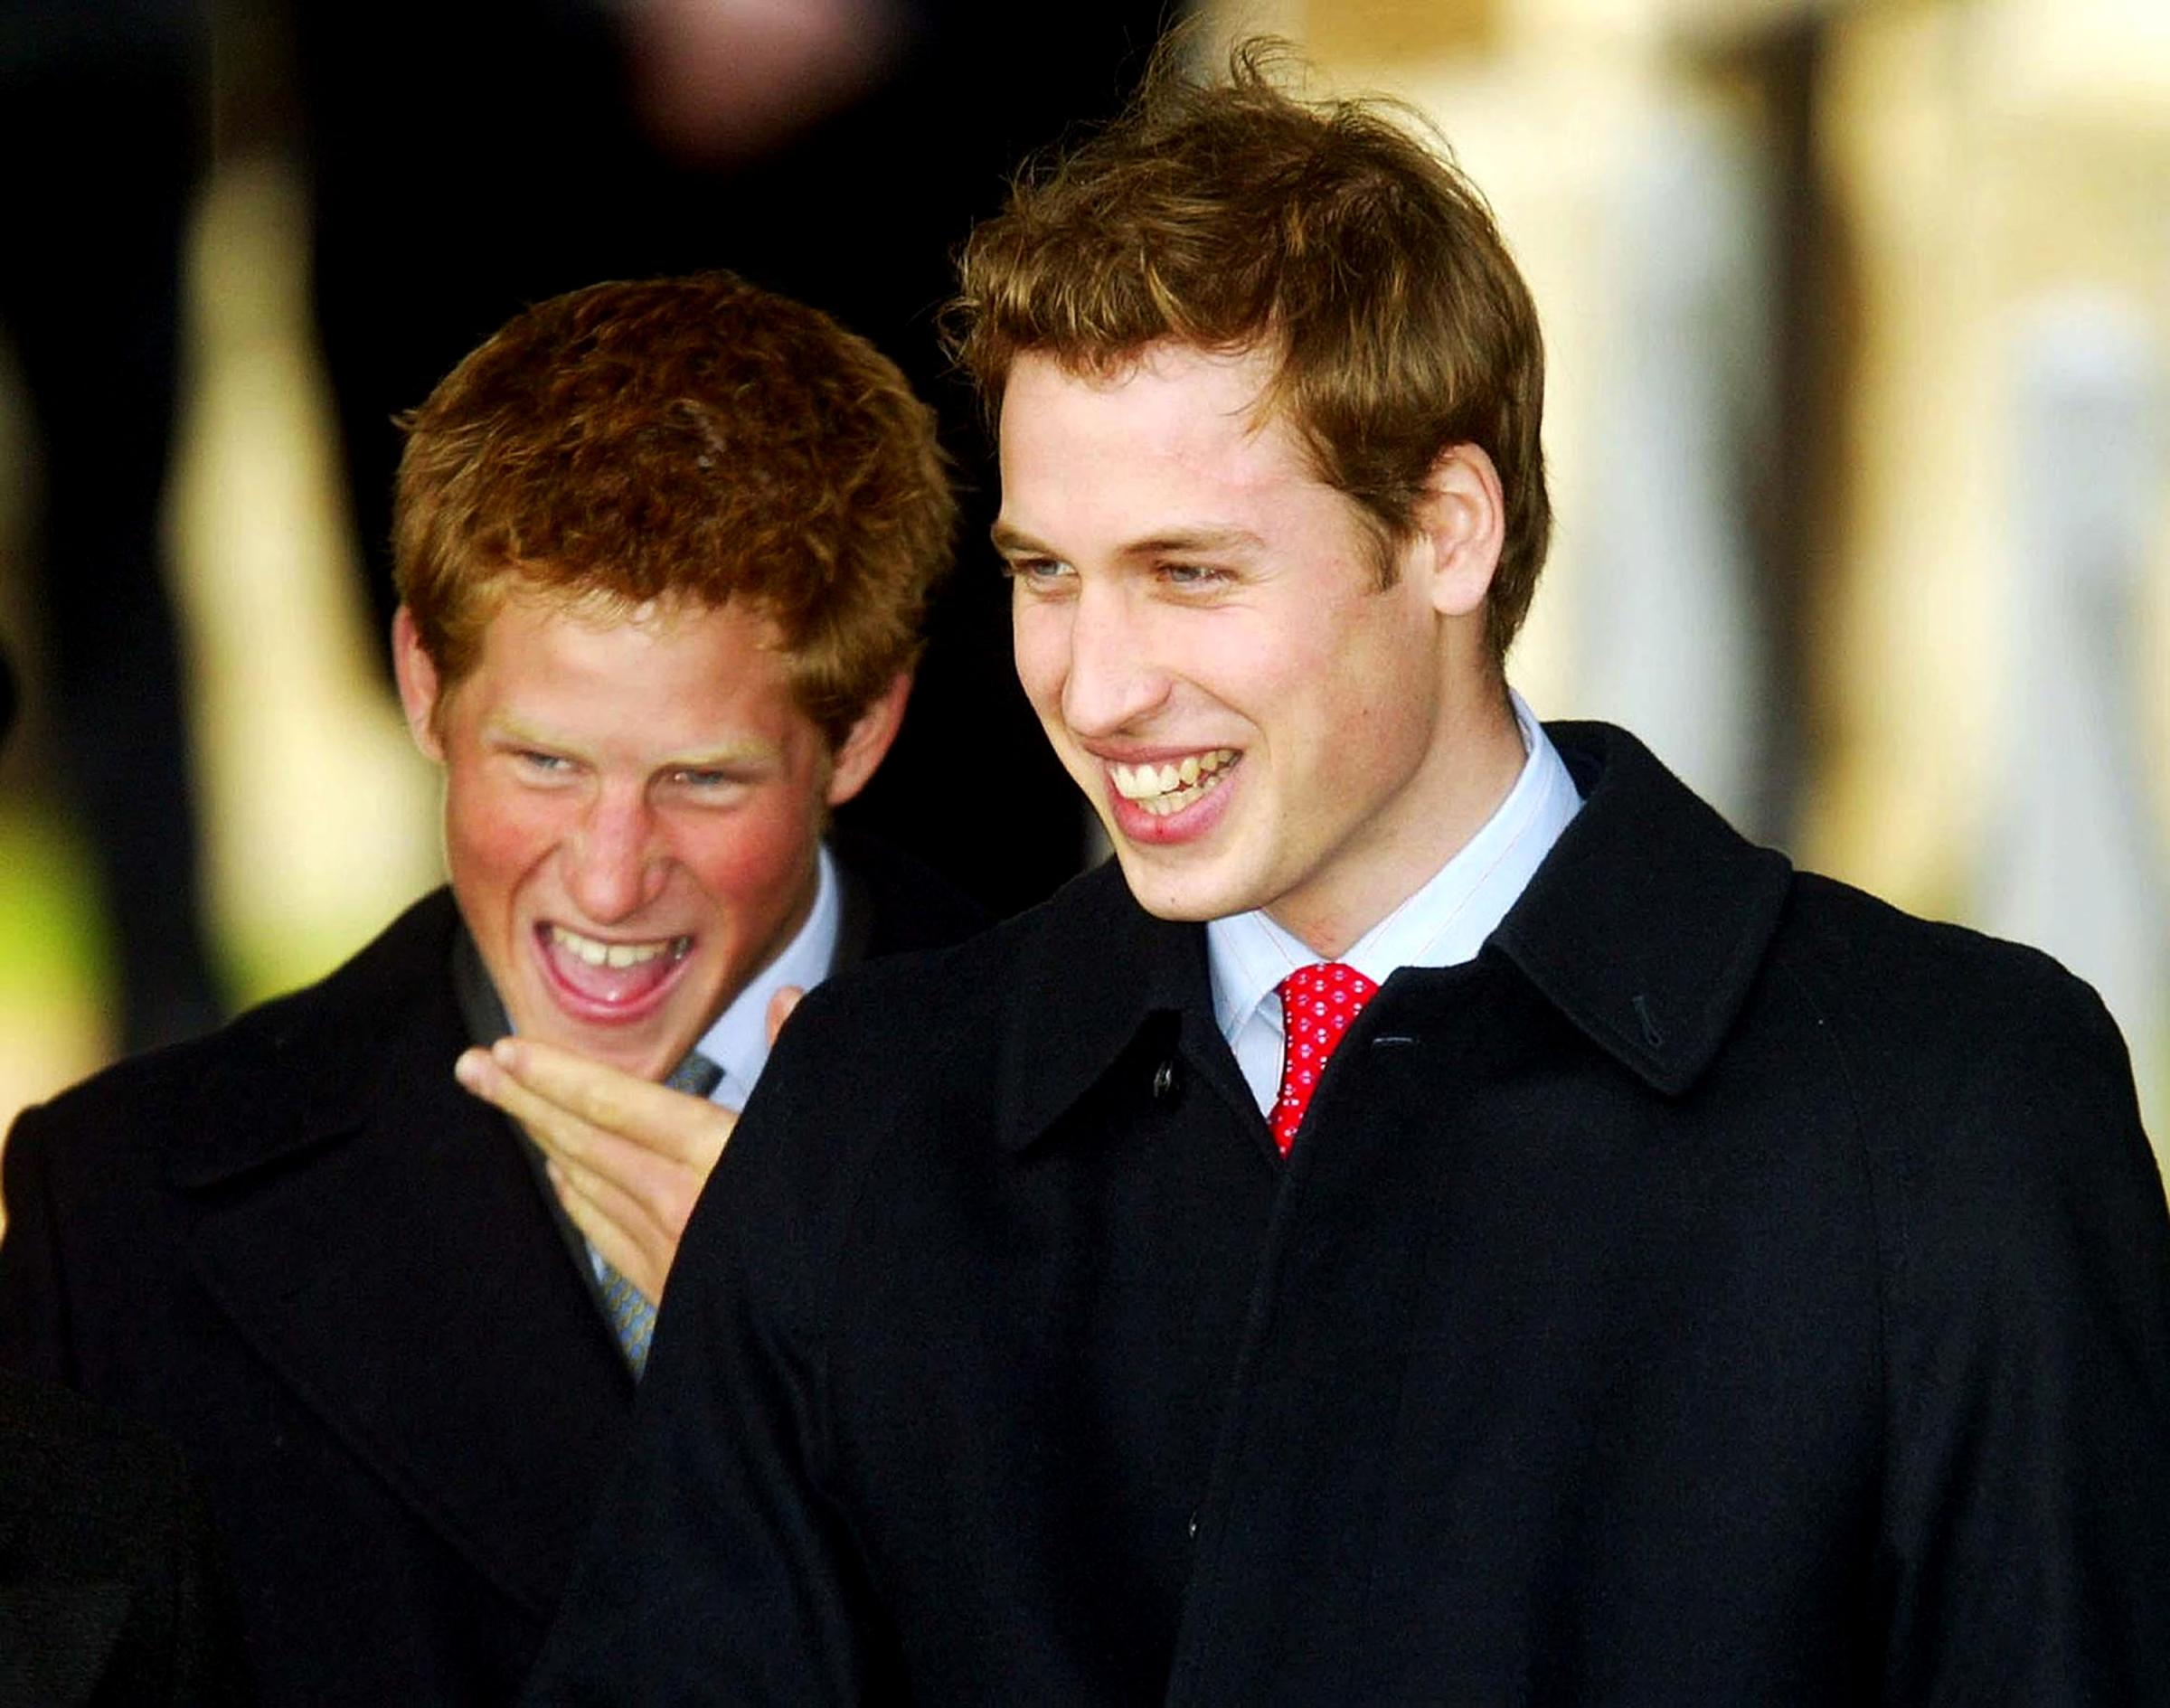 SANDRINGHAM, ENGLAND - DECEMBER 25:  (NO UK SALES FOR 28 DAYS. EMBARGOED UNTIL 001 JANUARY 22, 2004) HRH Prince Harry (L) and HRH Prince William leave along with other members of the Royal family after attending a Christmas Day service St. Mary Magdelene Church on December 25, 2003 in Norfolk, England. (Photo by ROTA/Getty Images) *** Local Caption *** Prince Harry;Prince William